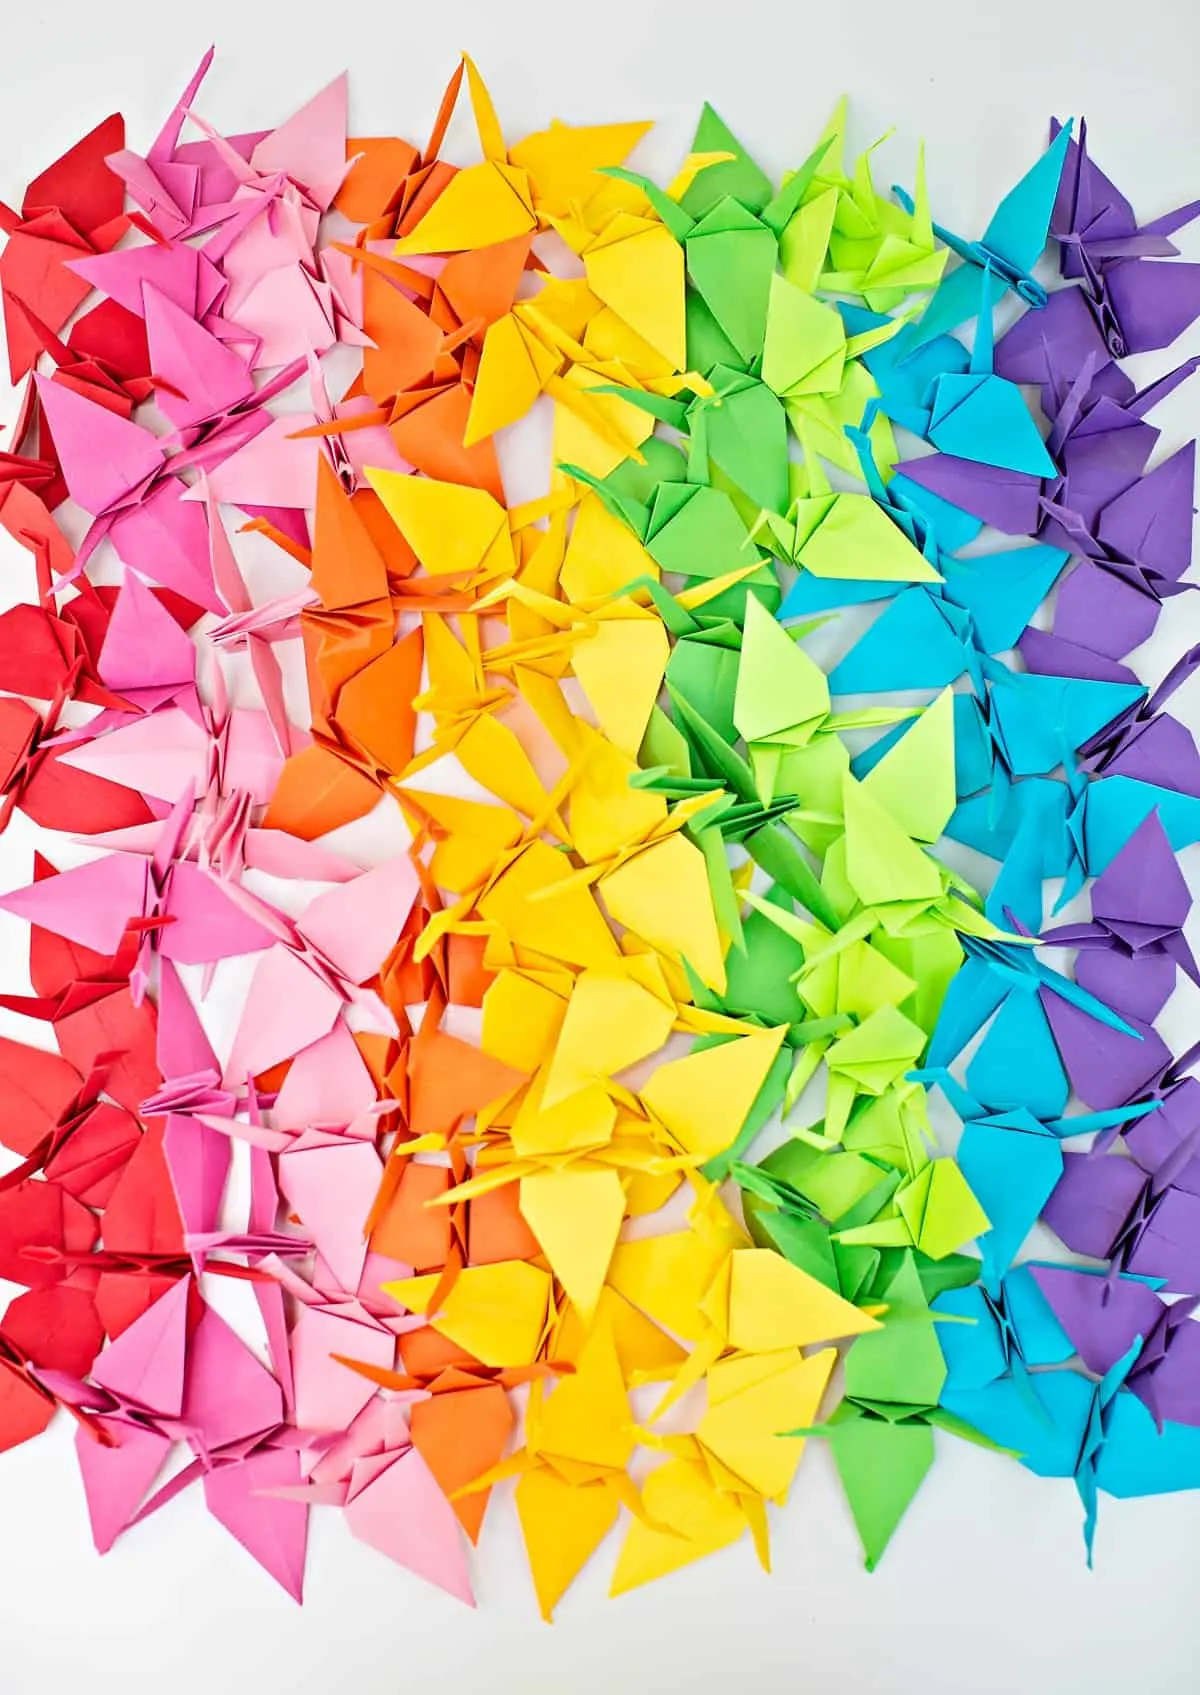 One million paper cranes project. Community project to show love and support during the coronavirus pandemic. 